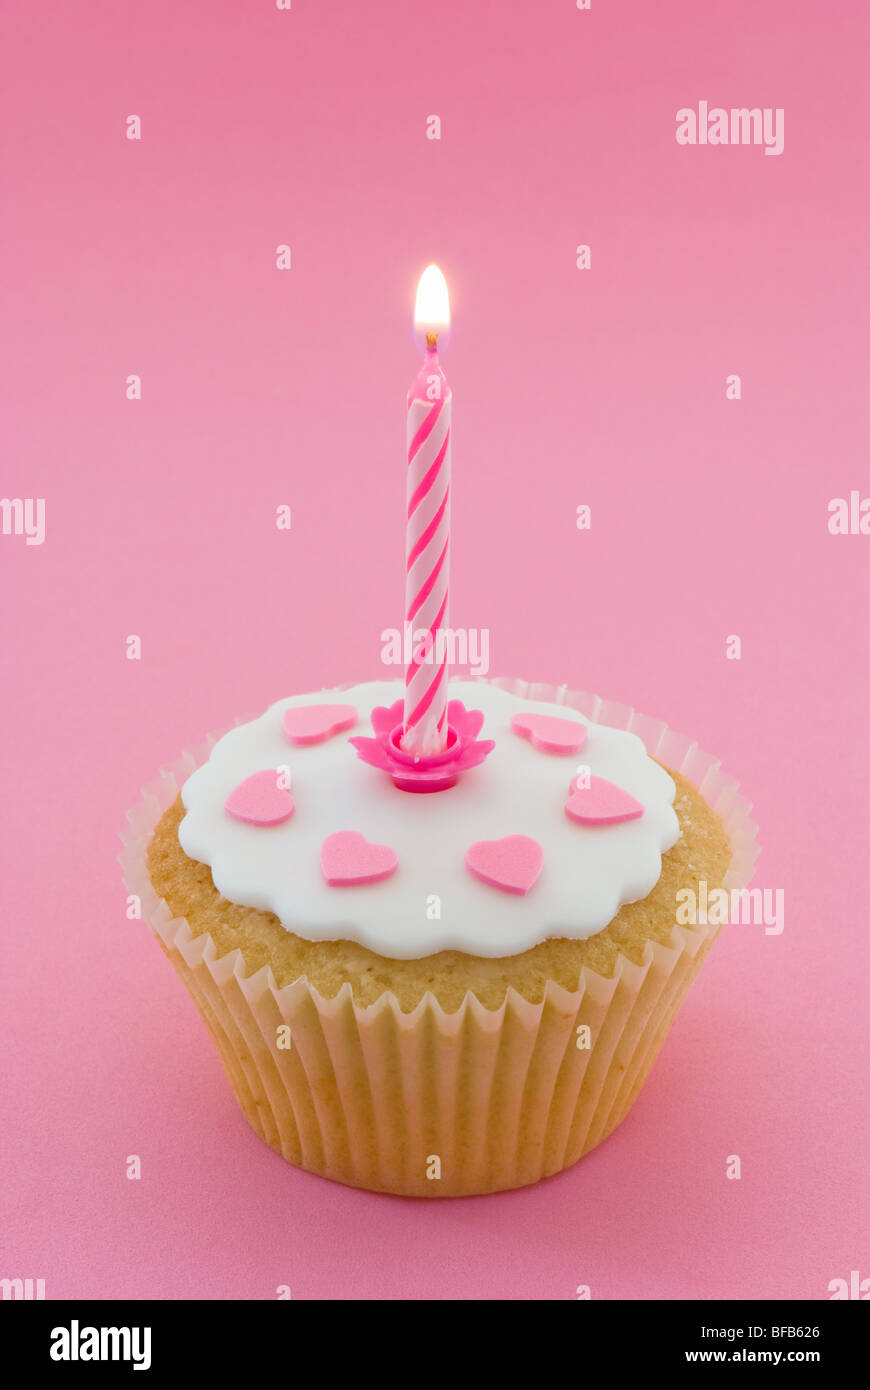 Single cupcake with lit candle Stock Photo